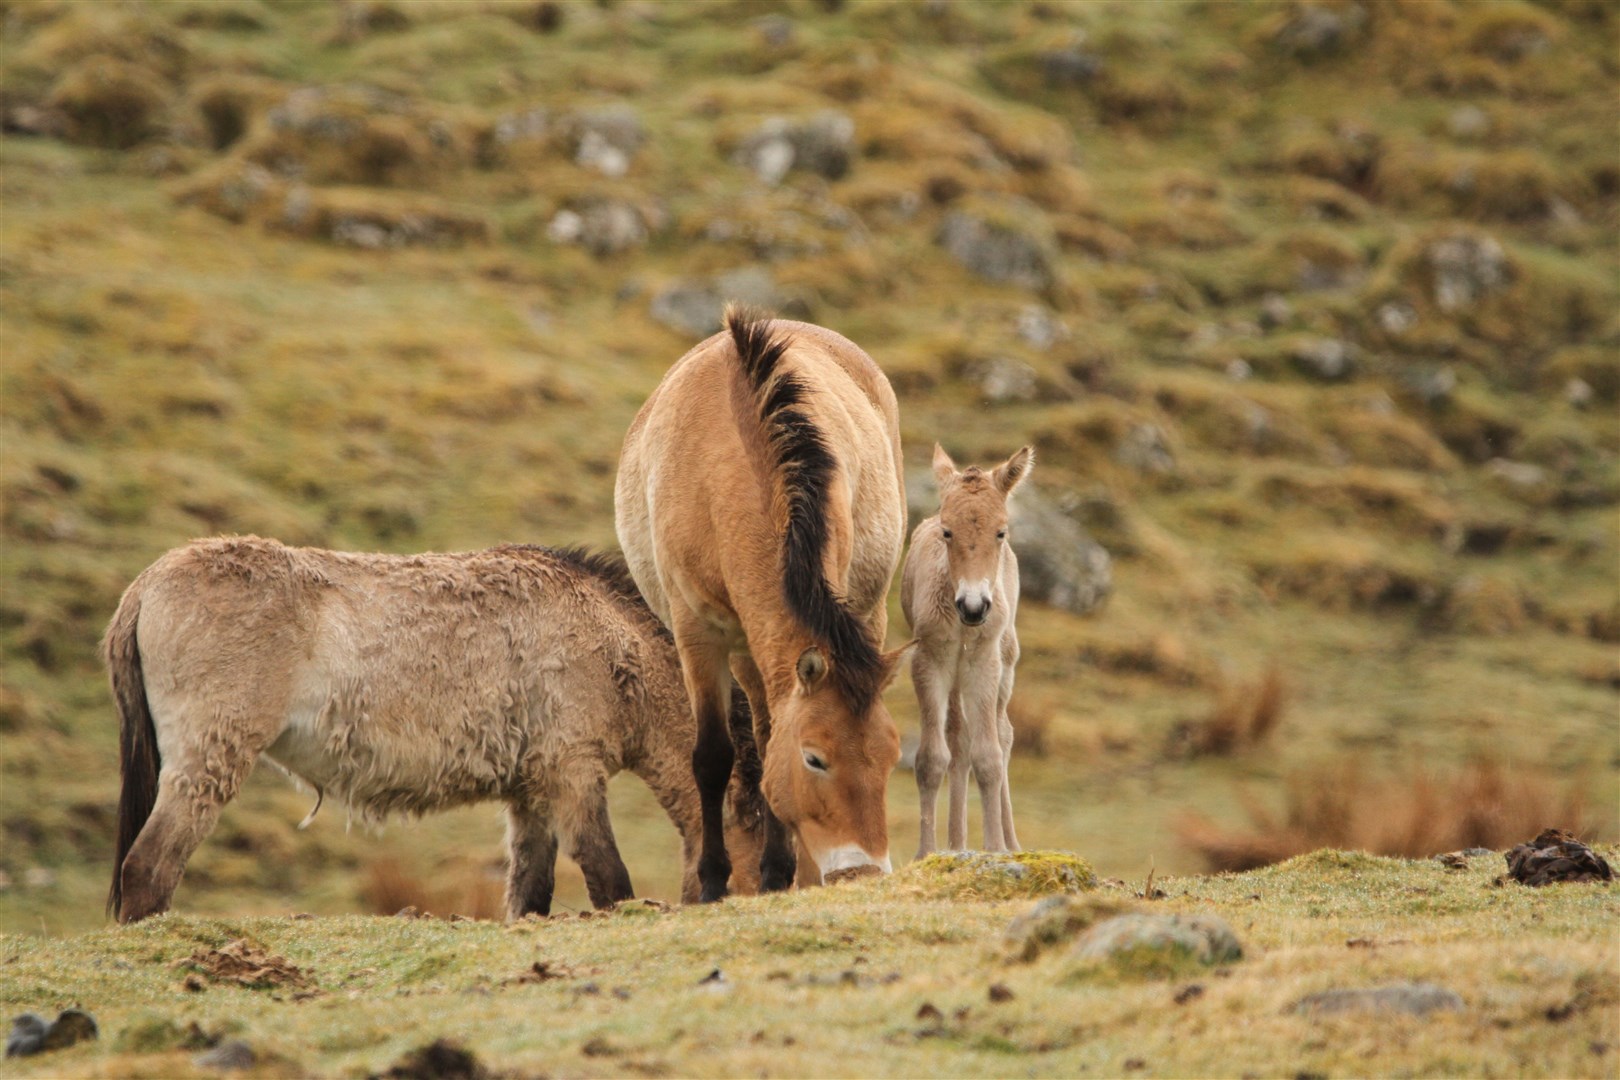 One of the two endangered Przewalski's horse foals still close to mum. Photo: RZSS